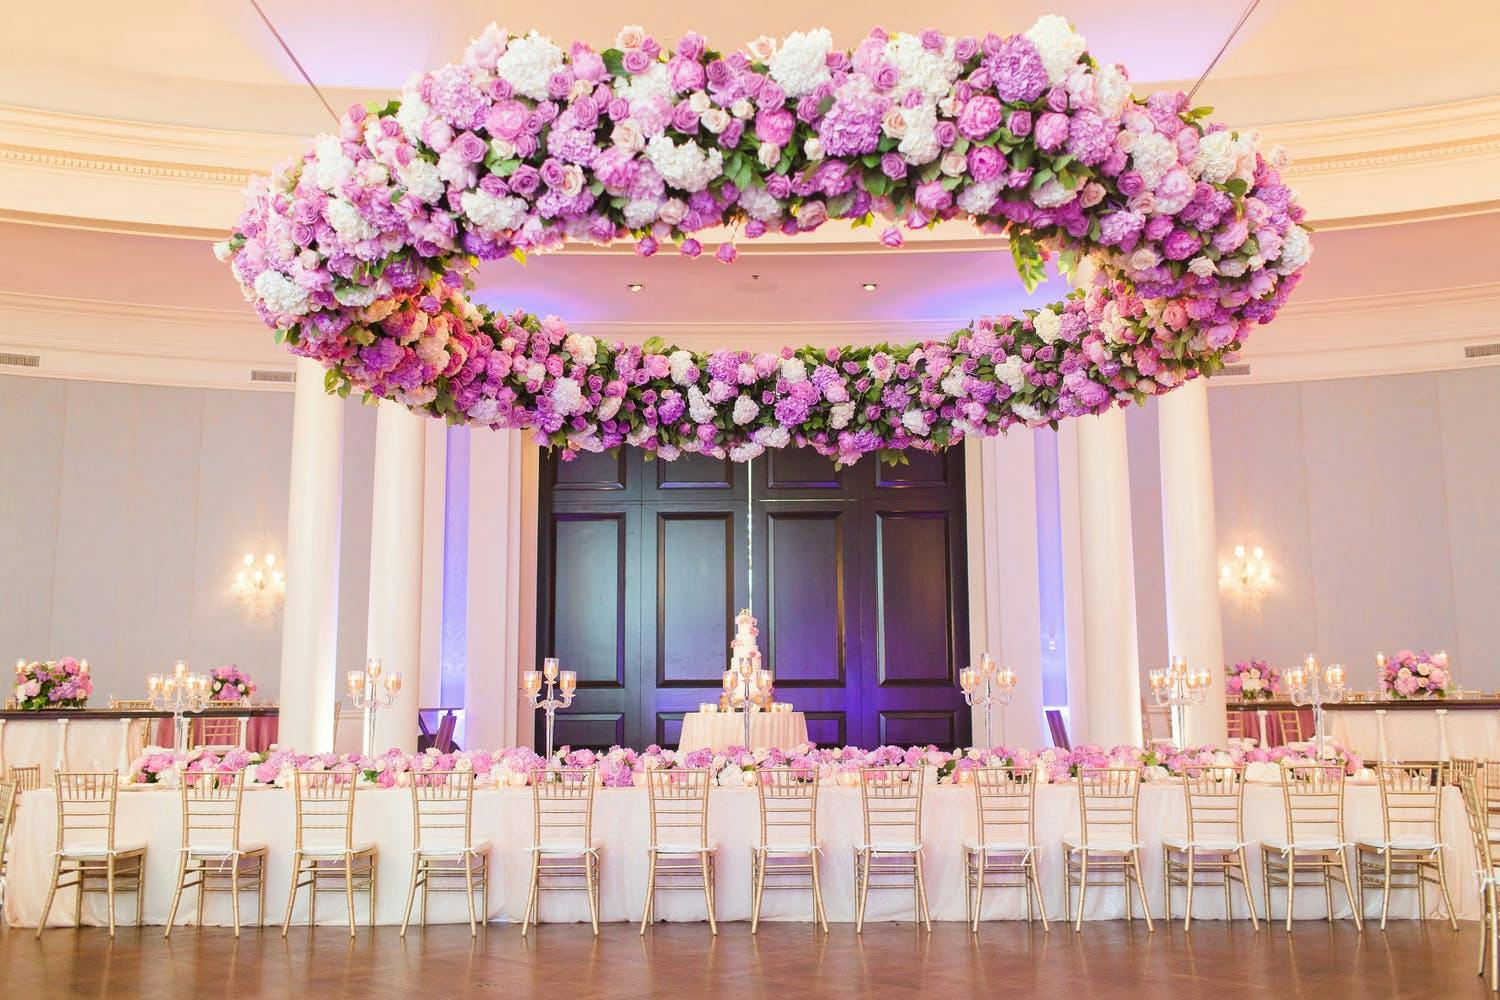 Wedding Ballroom in Peach and Neutral Tones With Suspended Giant Circular Wreathe of Pink and Purple Flowers | PartySlate